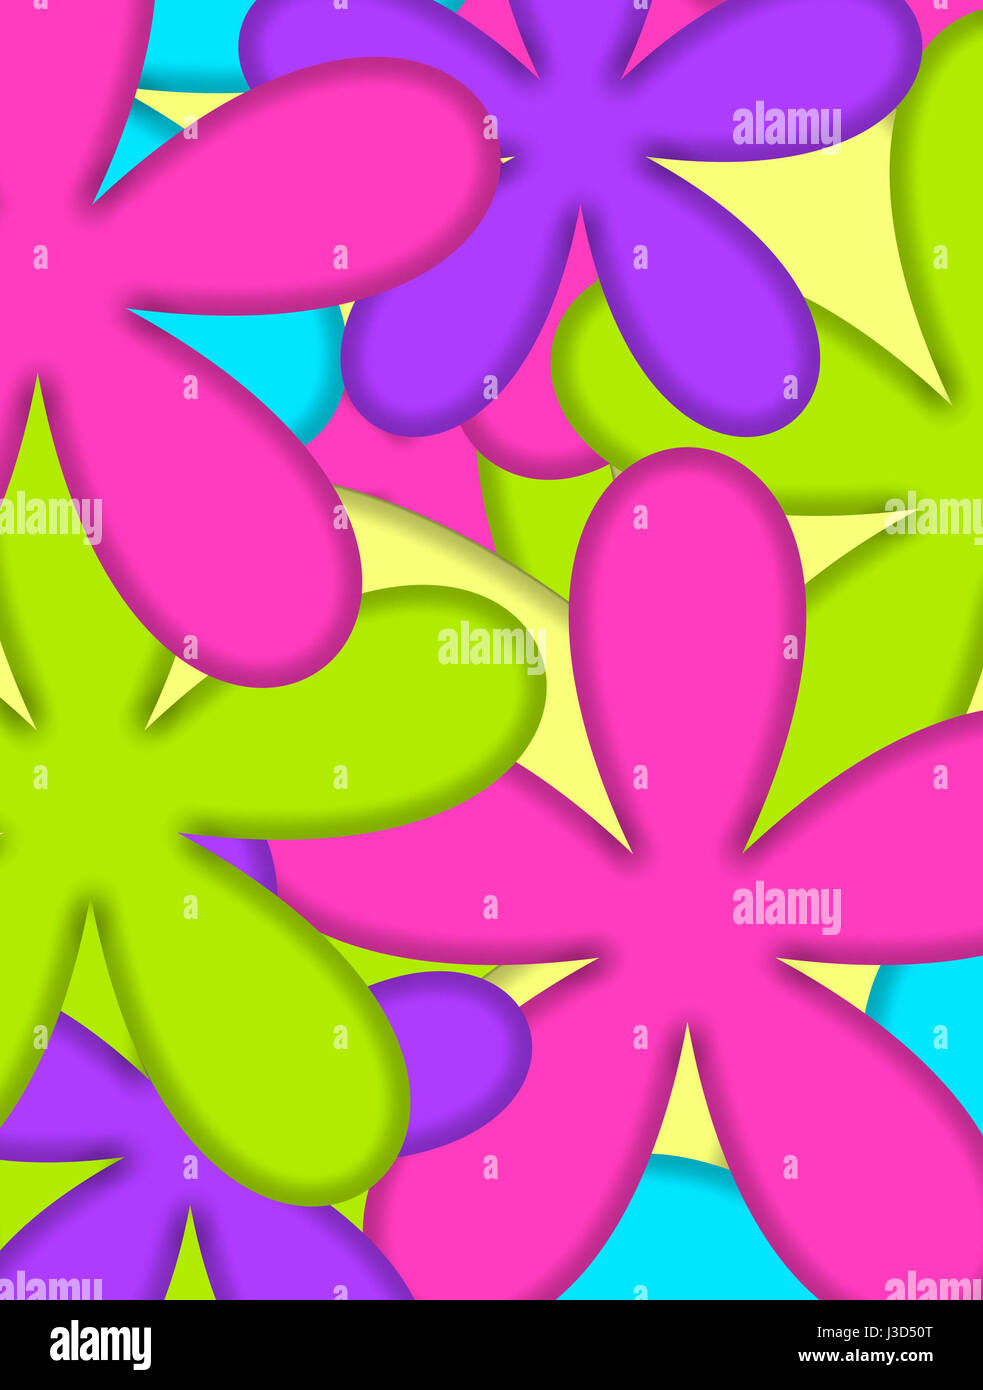 Big daisy like flowers in hot colors of pink, purple, yellow and green fill image. Stock Photo